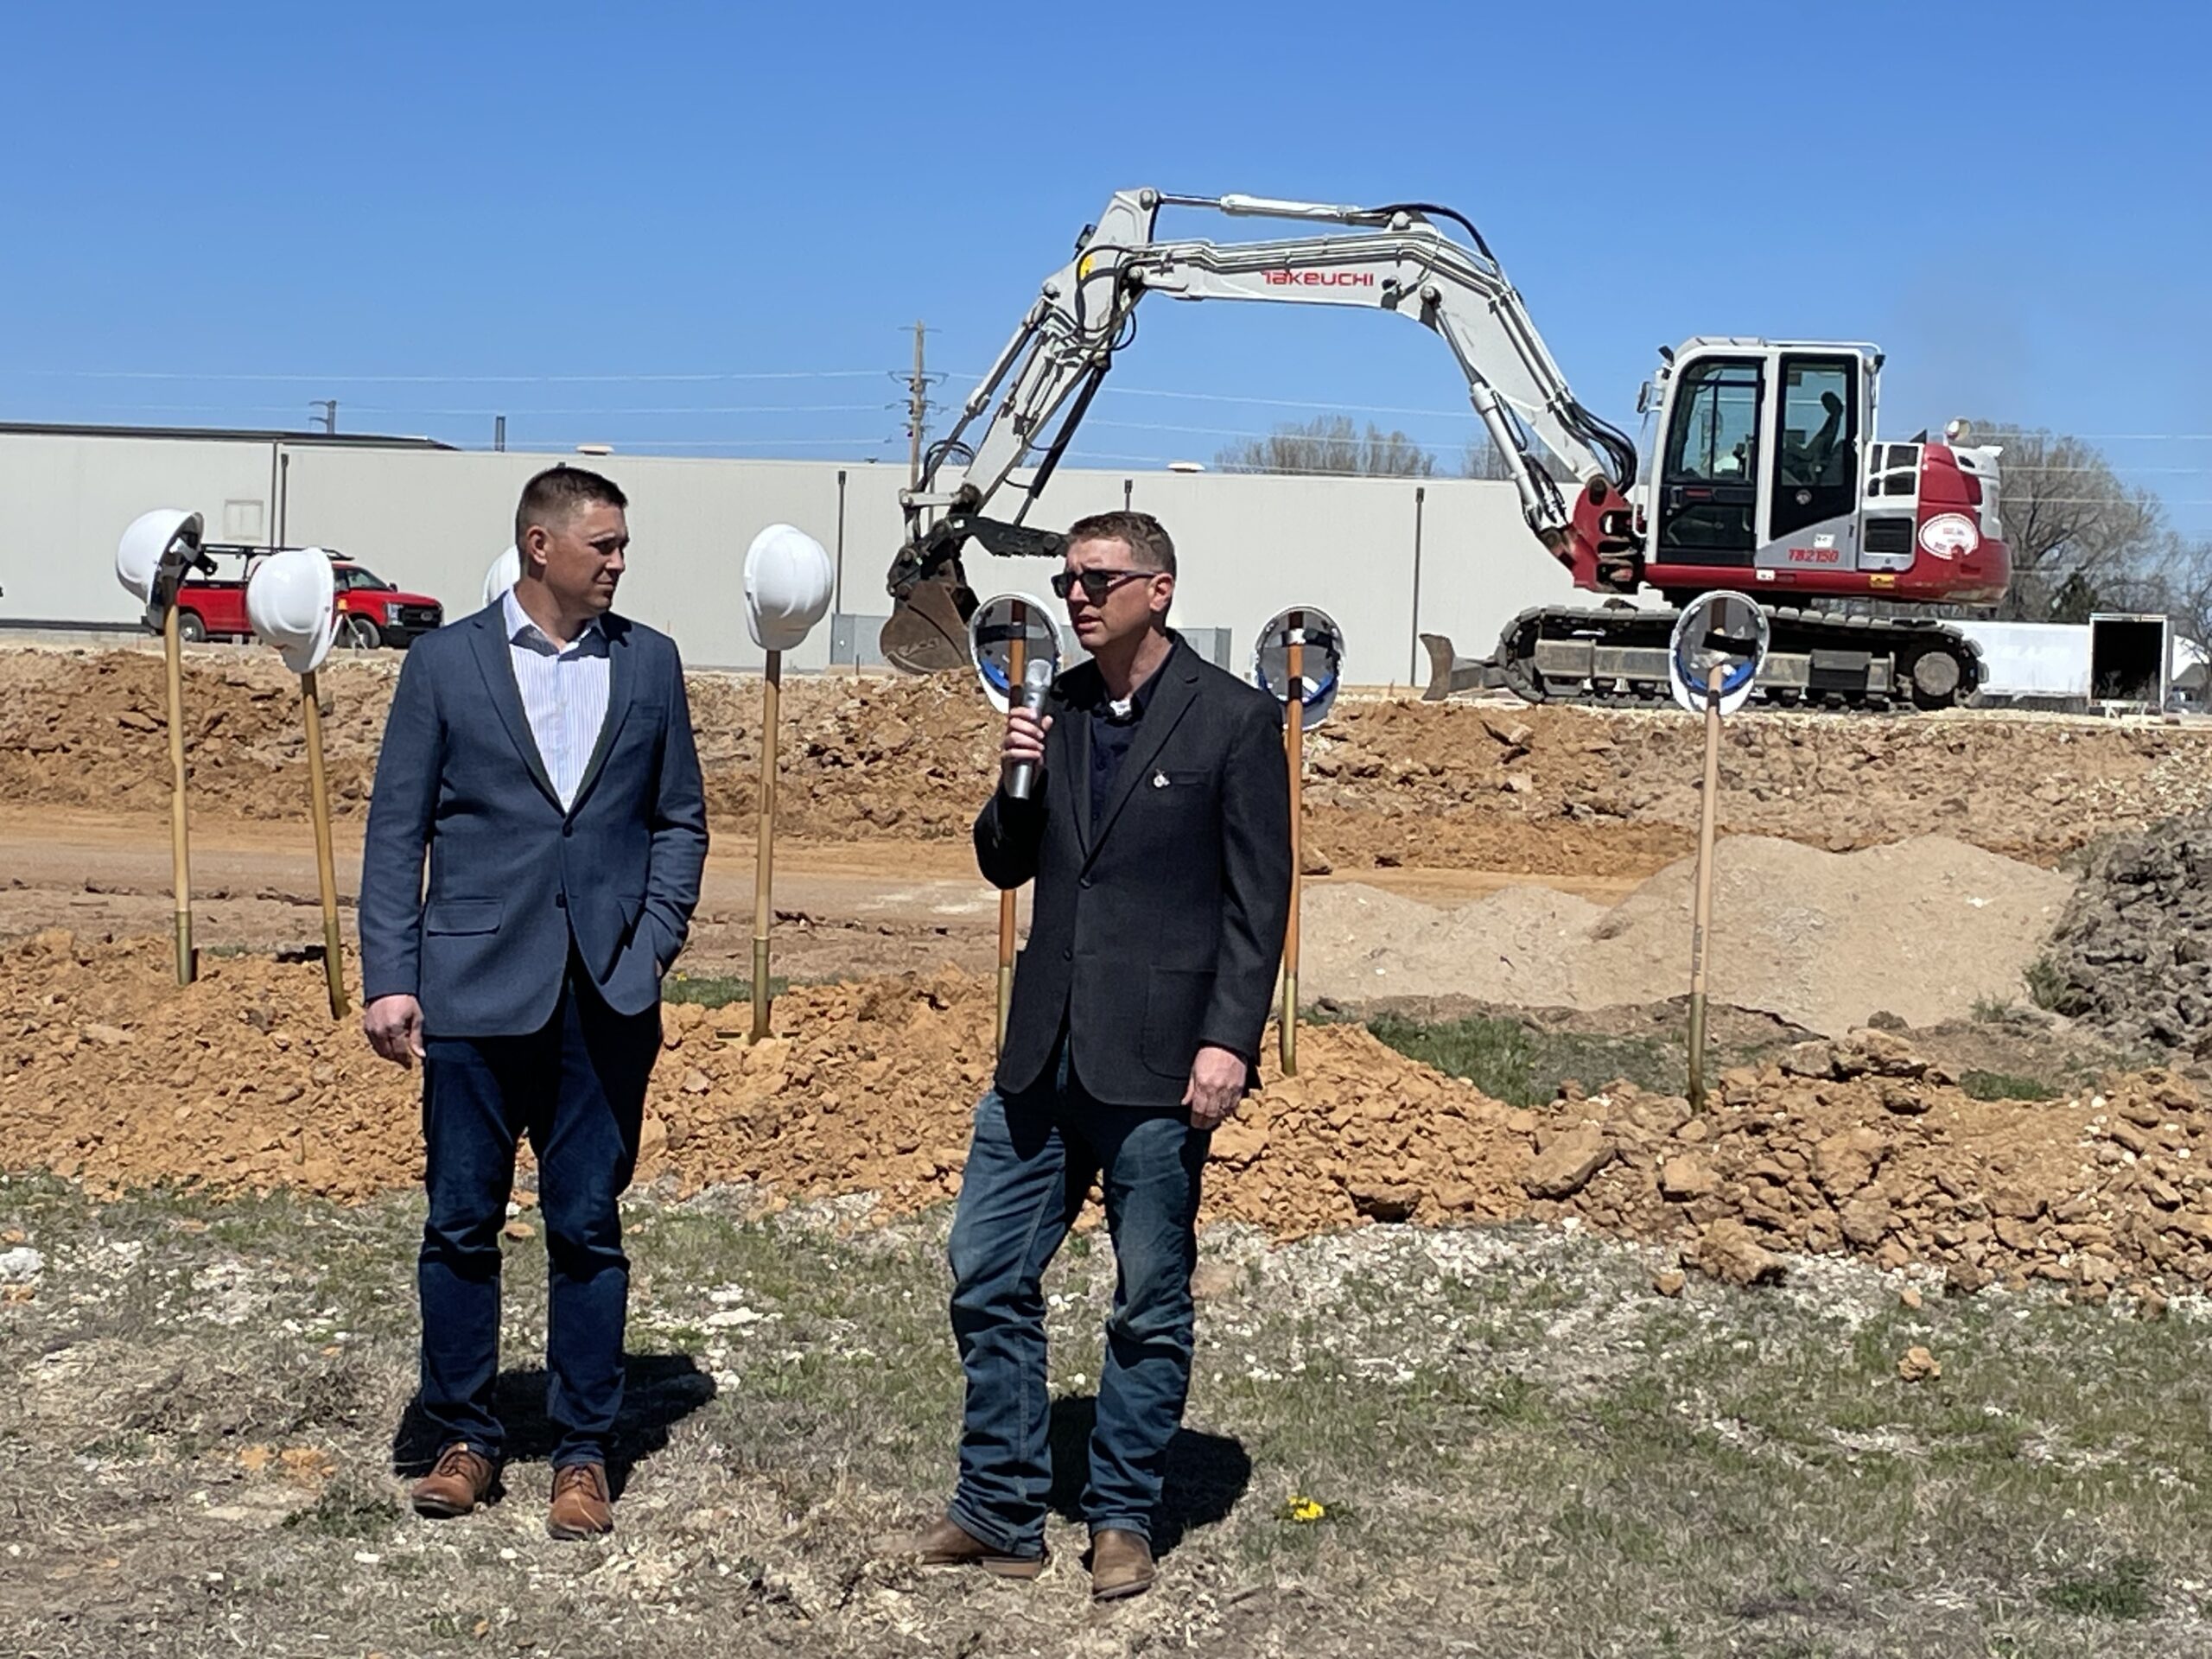 New Warehouse for Lease: Flint Hills Ventures Breaks Ground on Speculative Warehouse Project